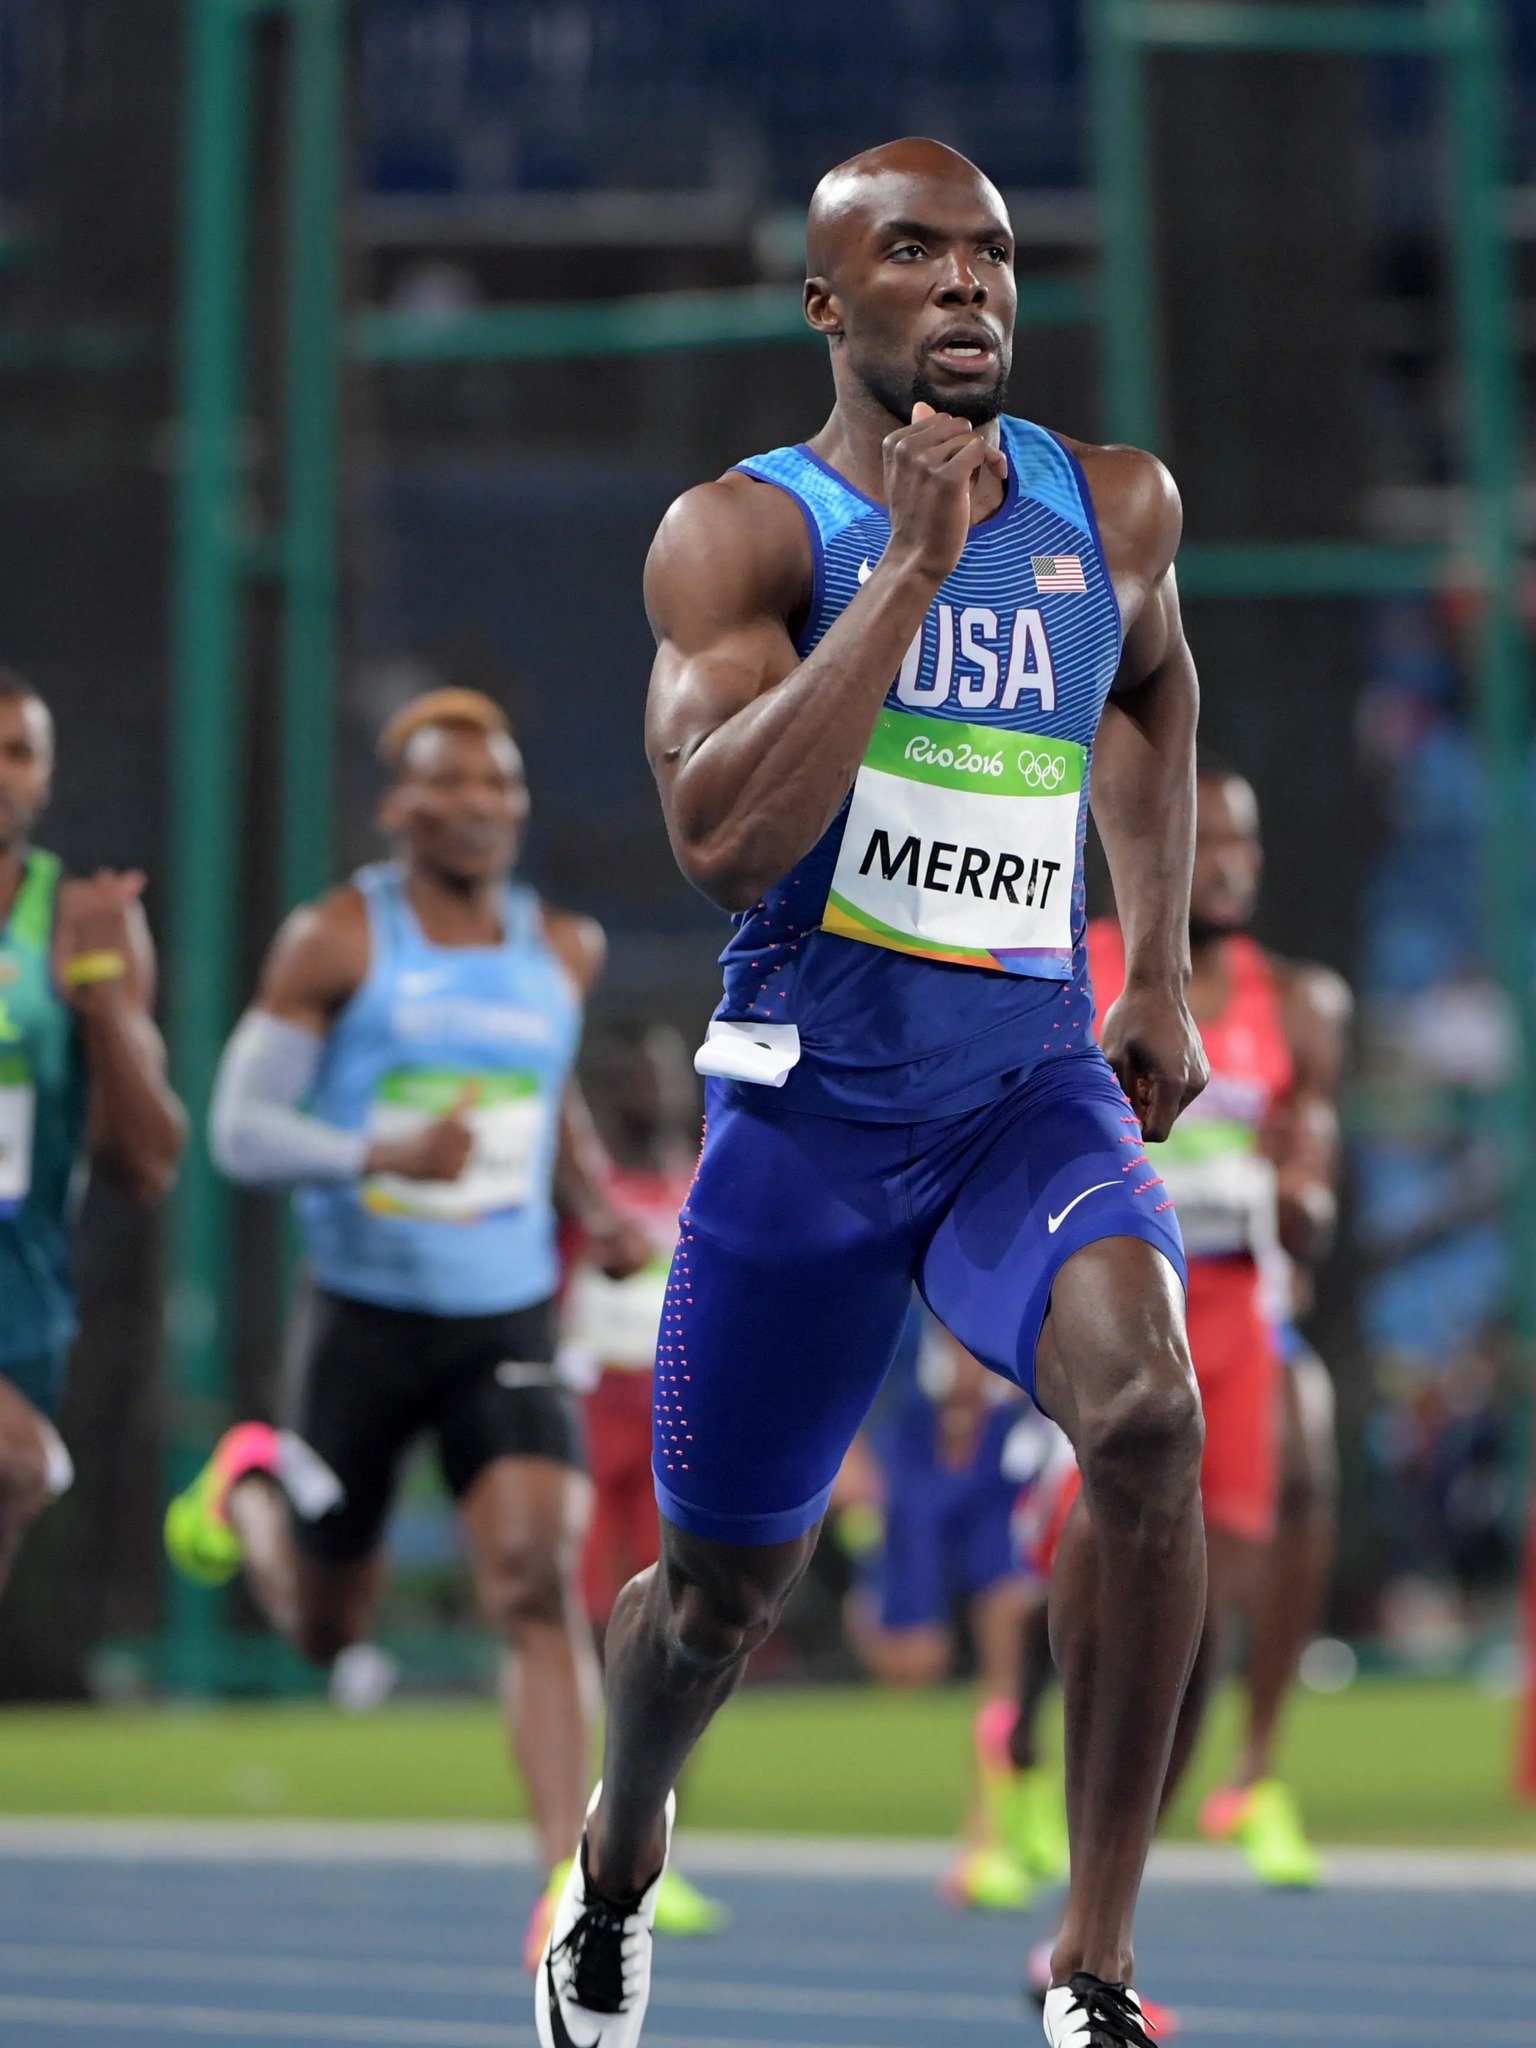 🚨🚨REMINDER: Today is the big day! LaShawn Merritt, US Olympic Gold medalist runner is going to be at FLEET FEET in downtown Traverse City from 4:45-7pm. Meet this world class athlete and join us for a fun run immediately after! We're a proud sponso